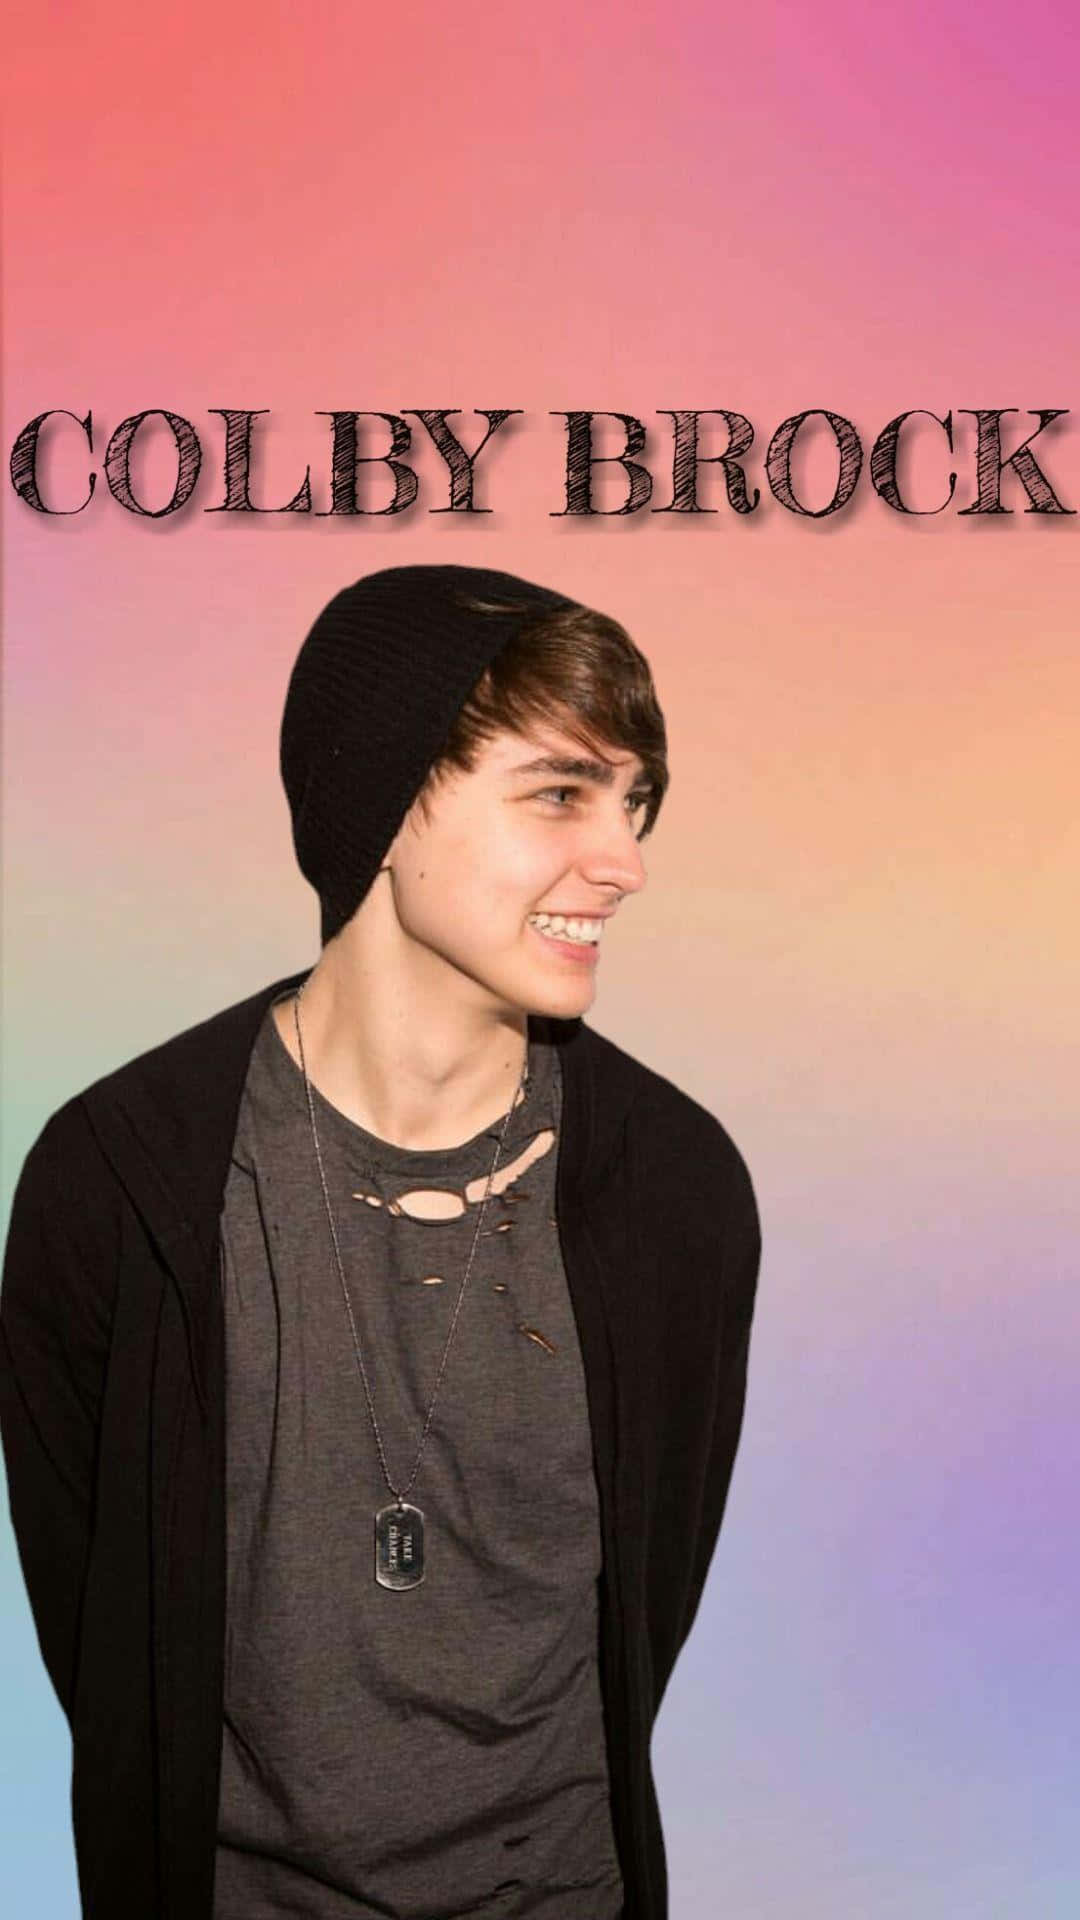 Colby Brock strikes a winning pose in a featured photo. Wallpaper